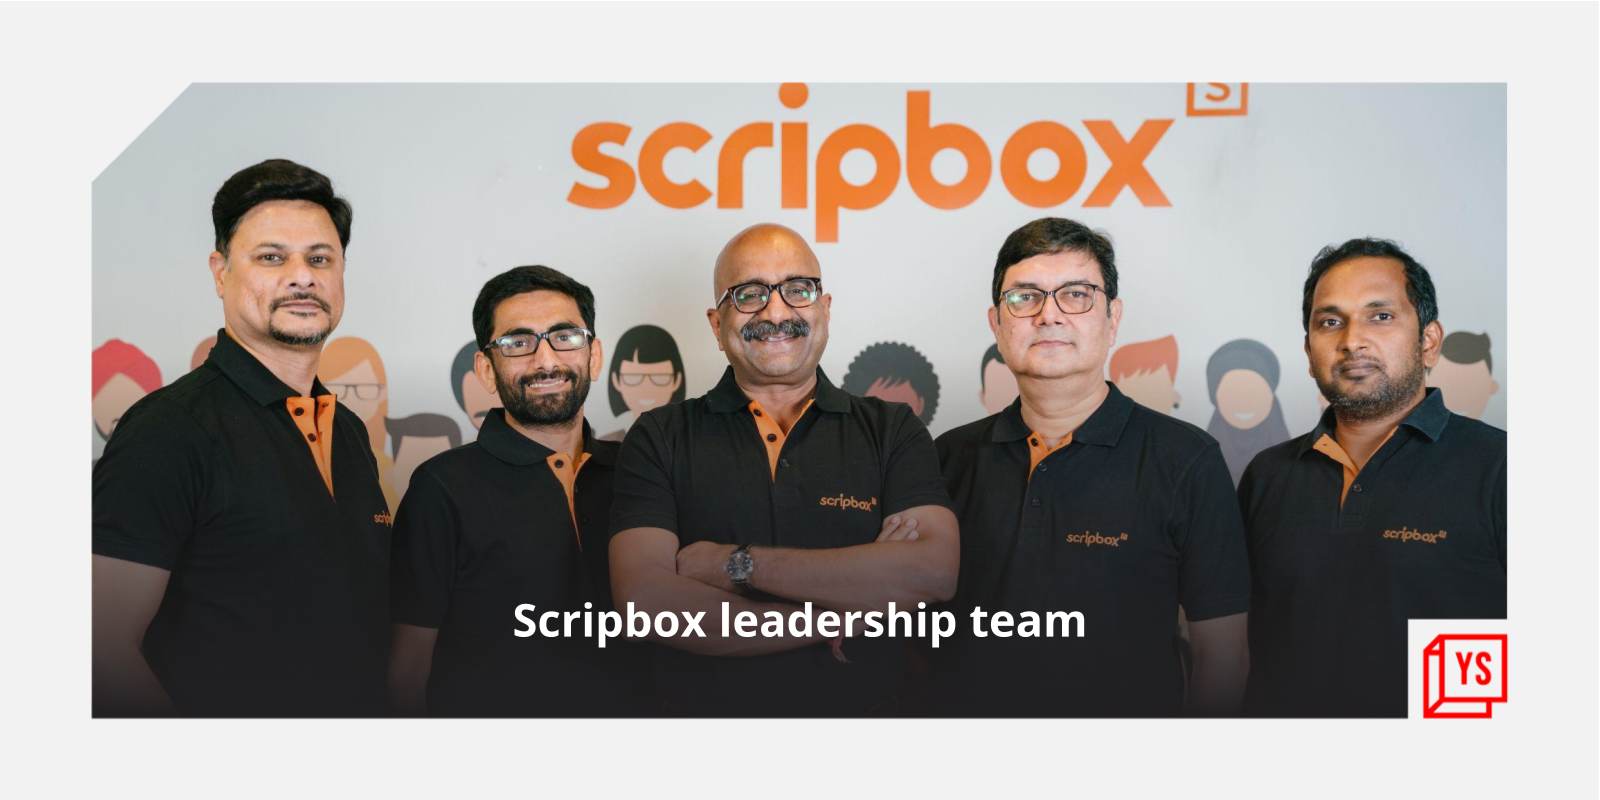 [Funding alert] Fintech startup Scripbox raises $21M in Series D round led by Accel Partners